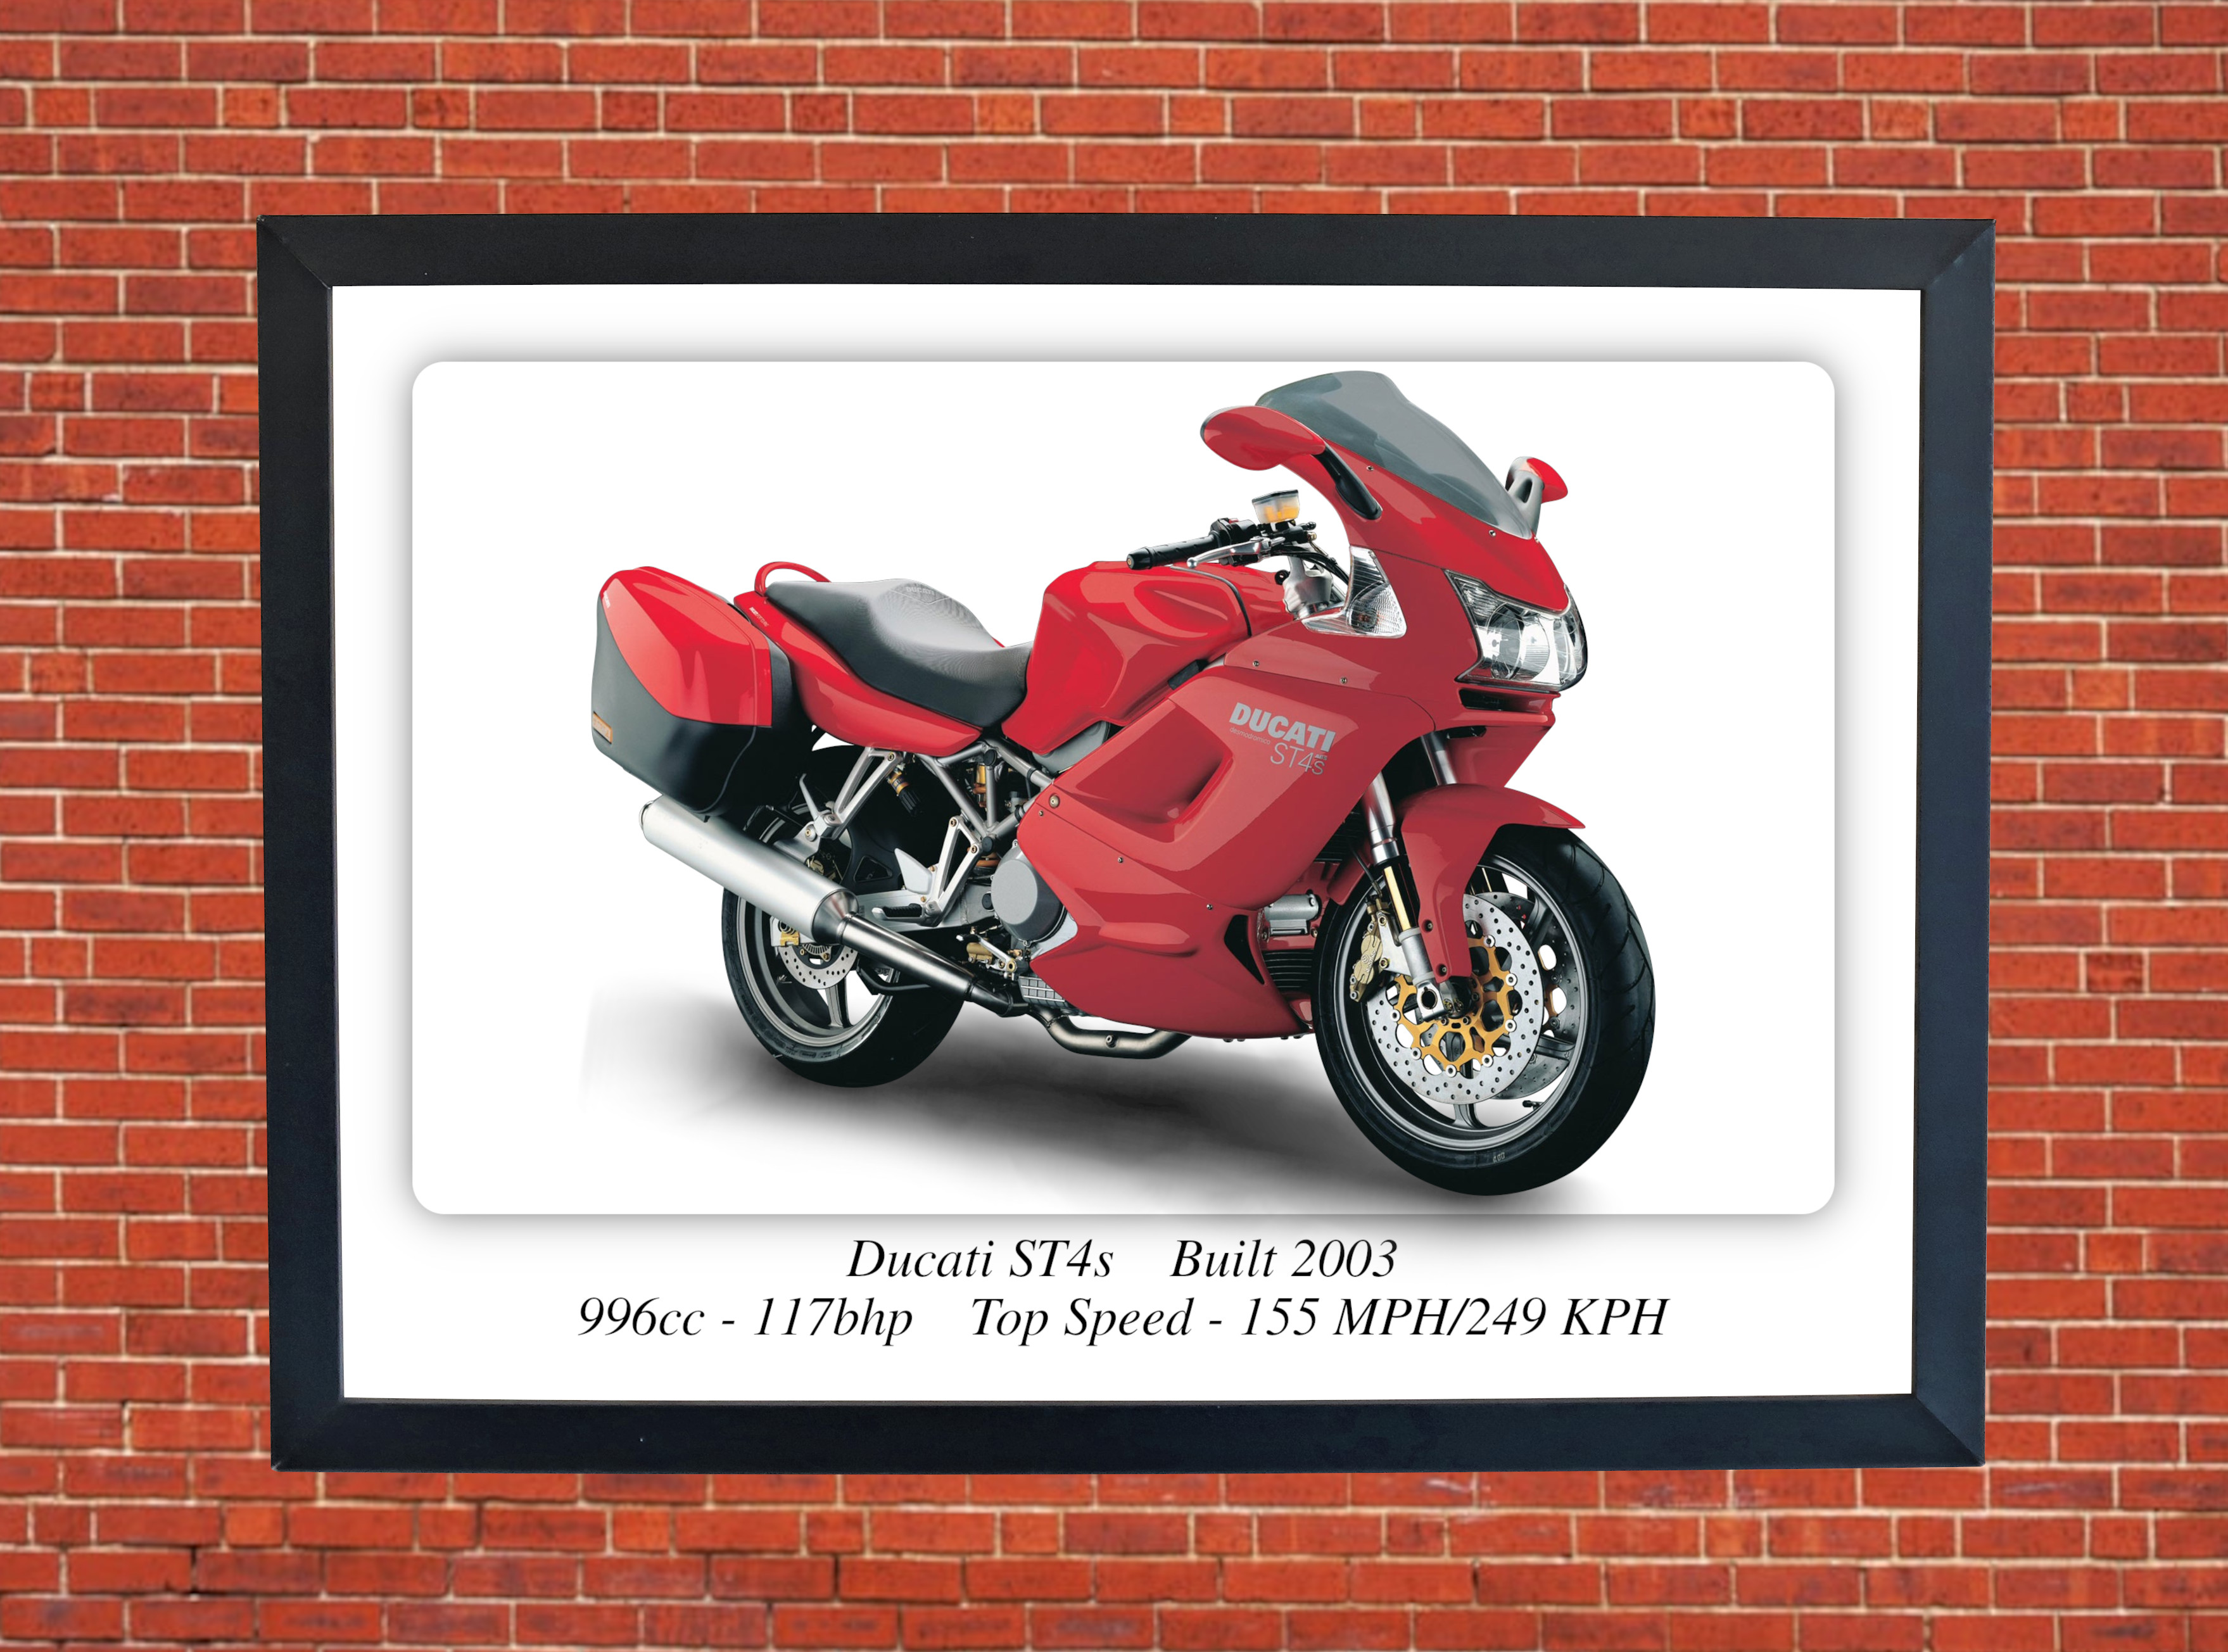 Ducati ST4S Sports Tourer Biposto Motorcycle - A3/A4 Poster/Print